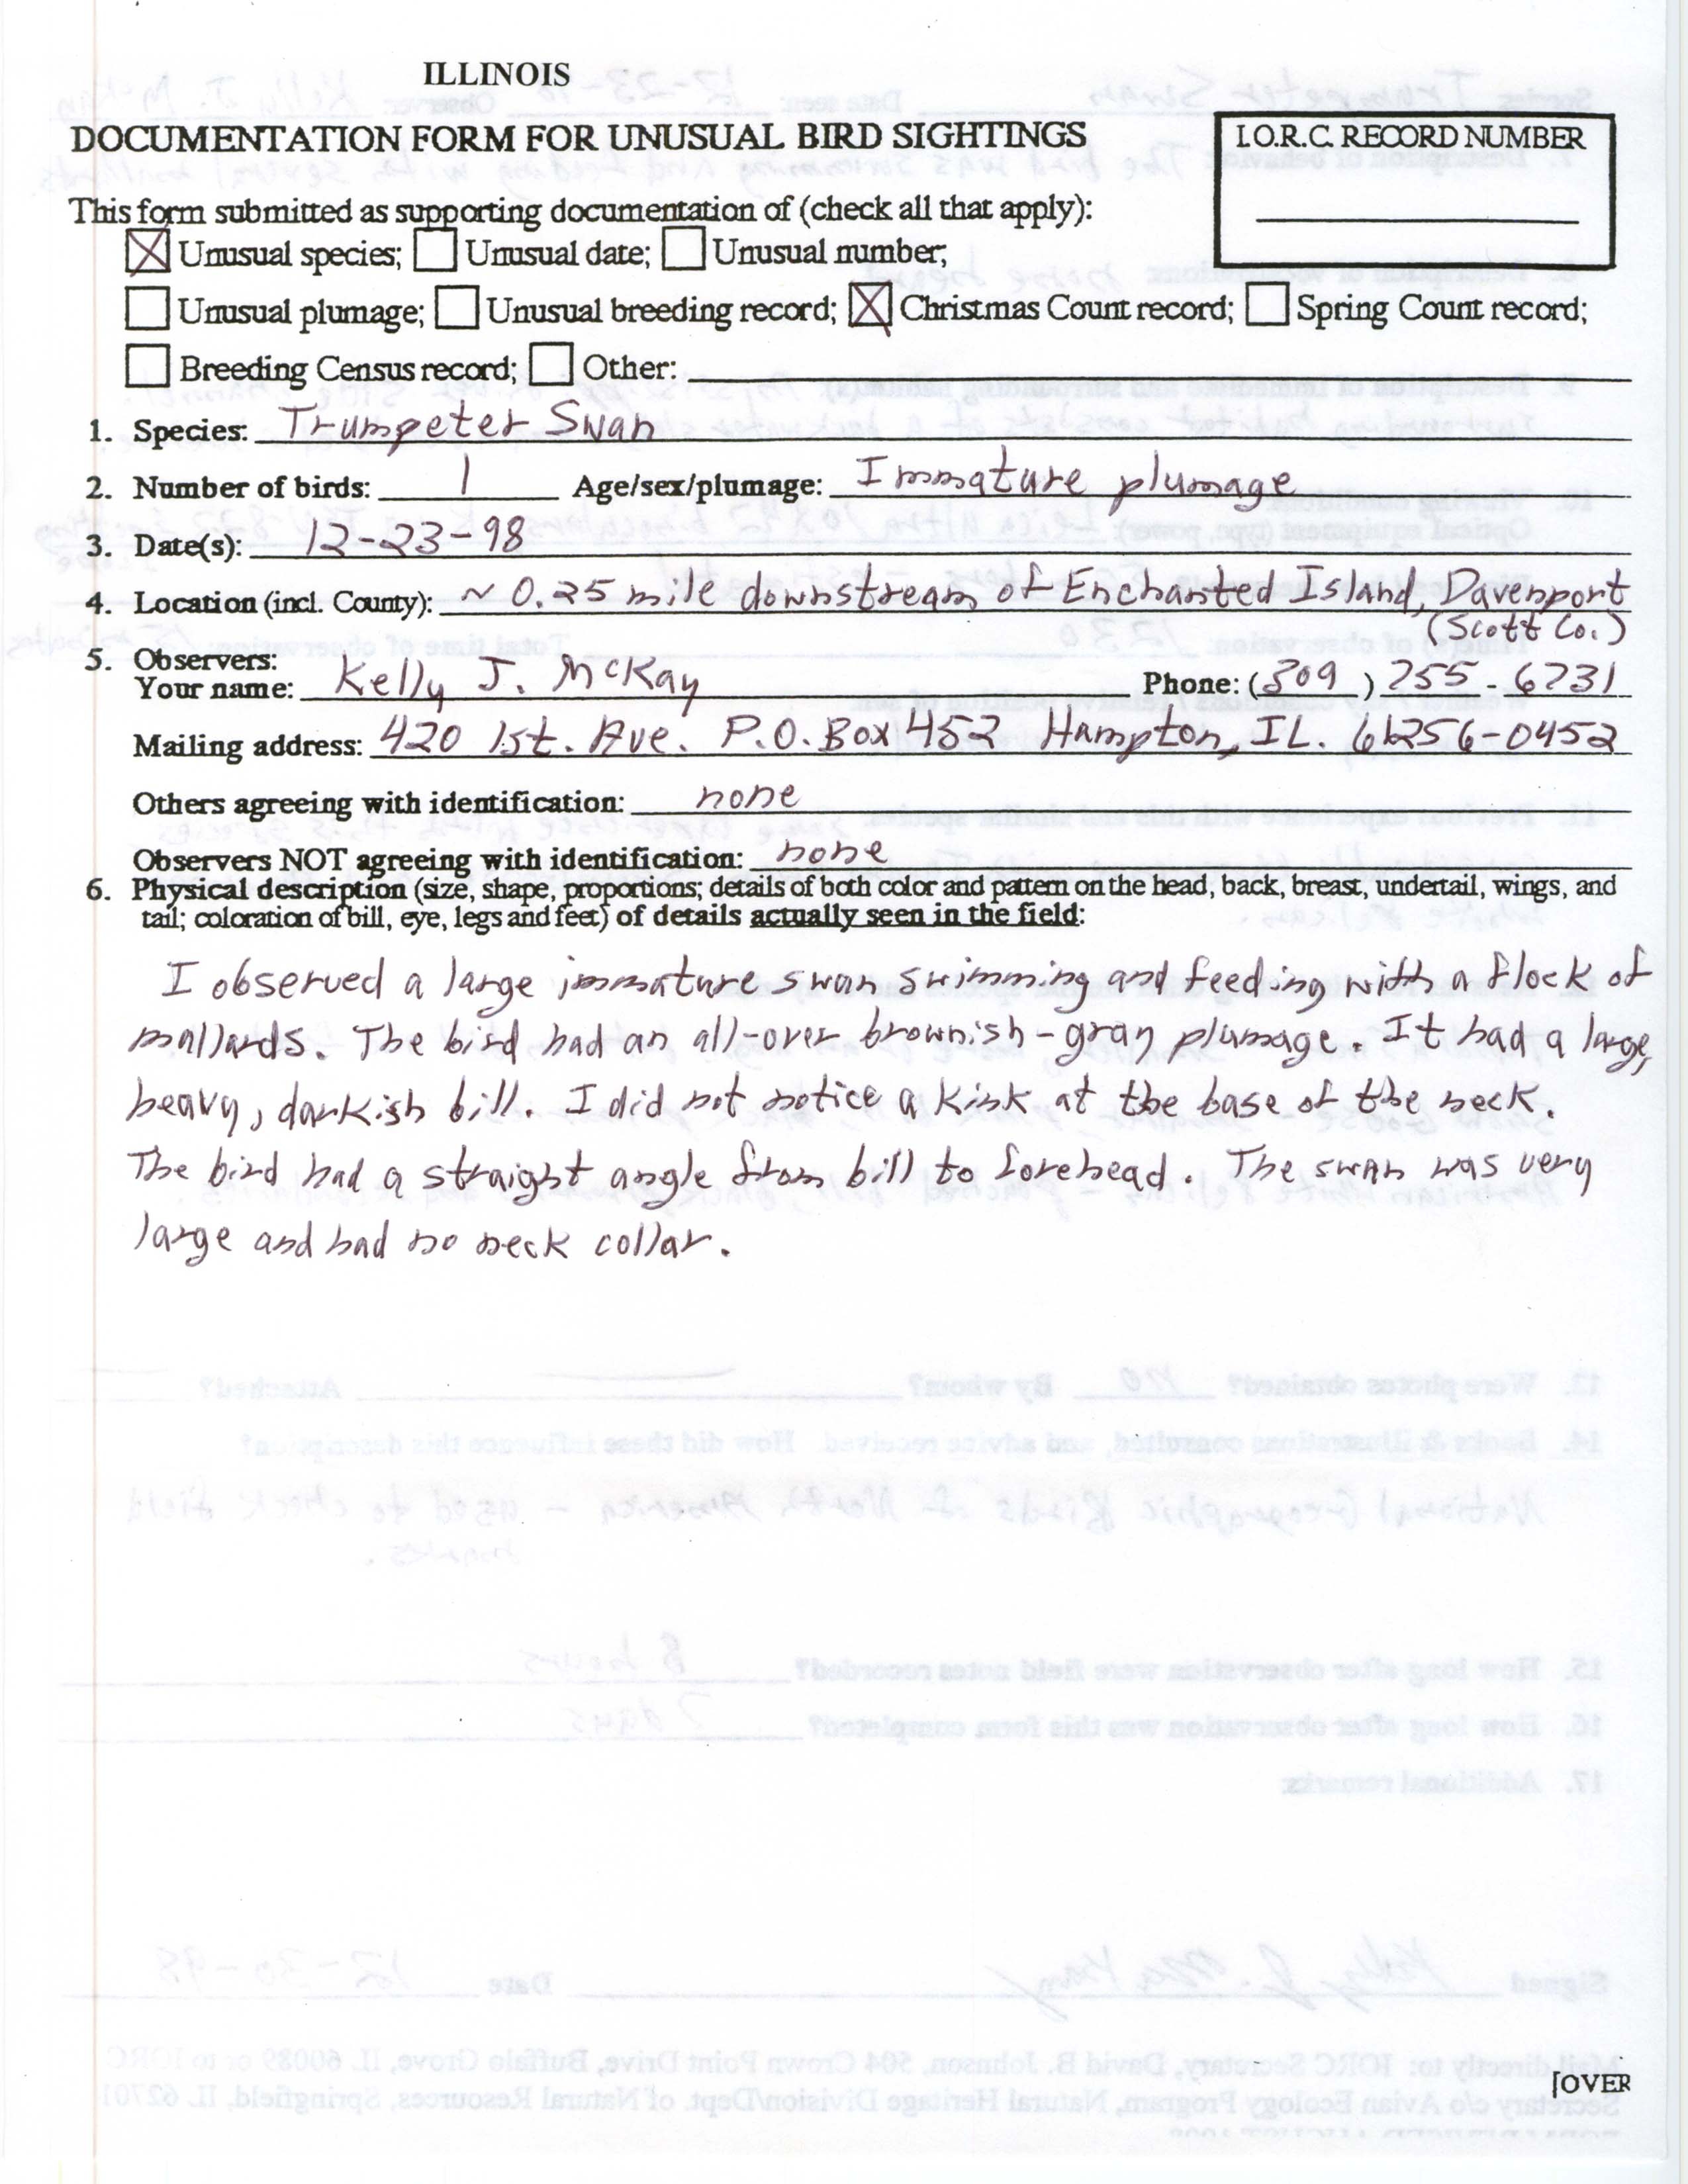 Rare bird documentation form for Trumpeter Swan at Mississippi River in Davenport, 1998